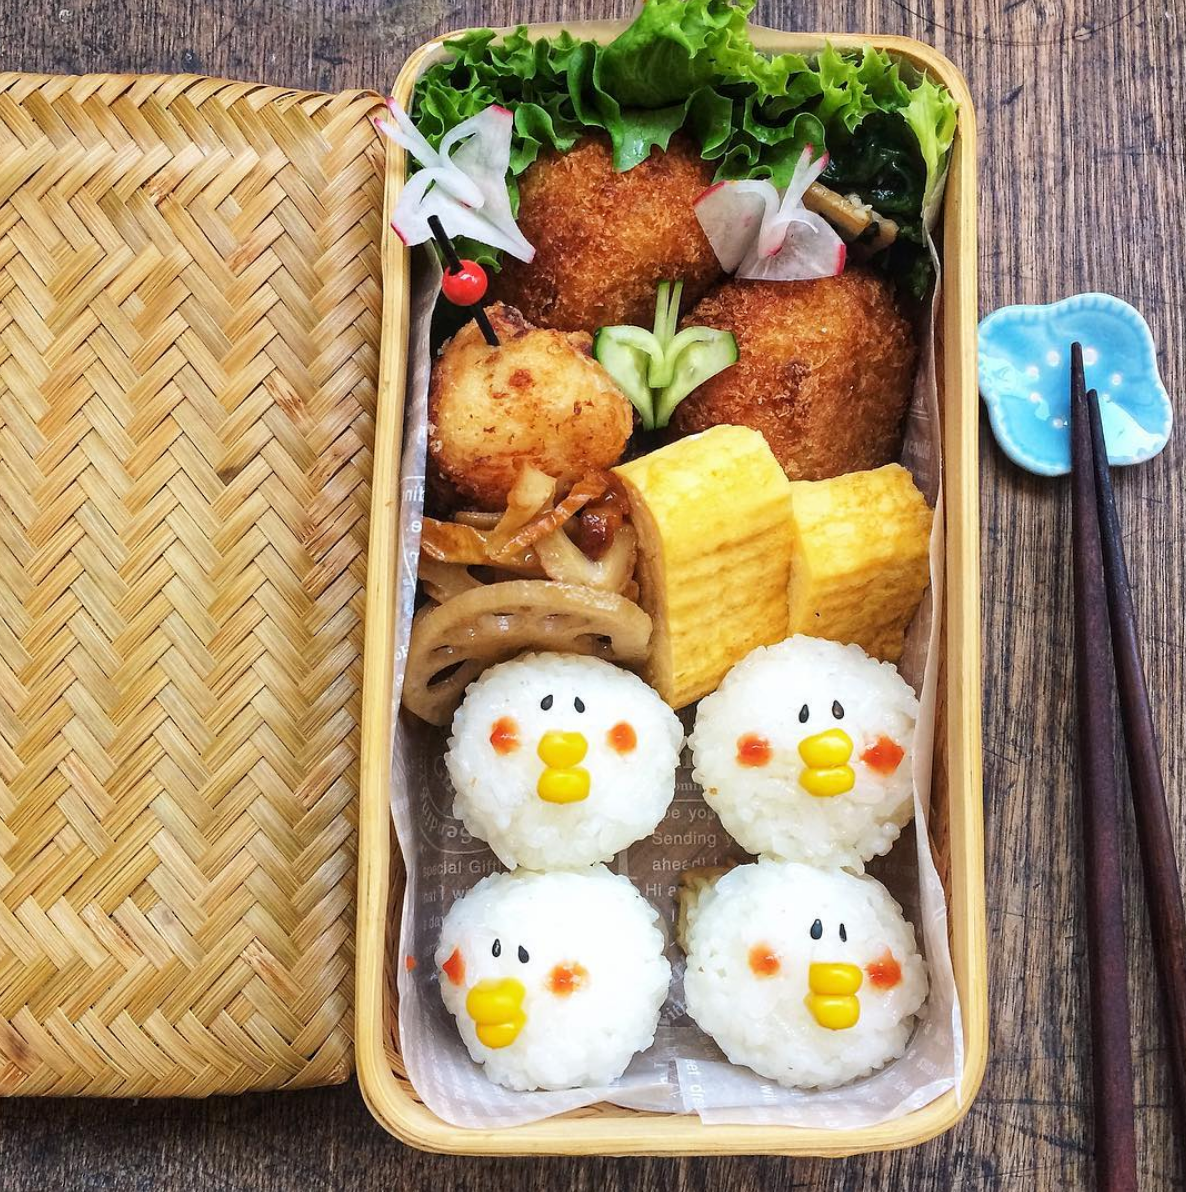 Deconstructing The Bento Box. For packed lunch envy (office or